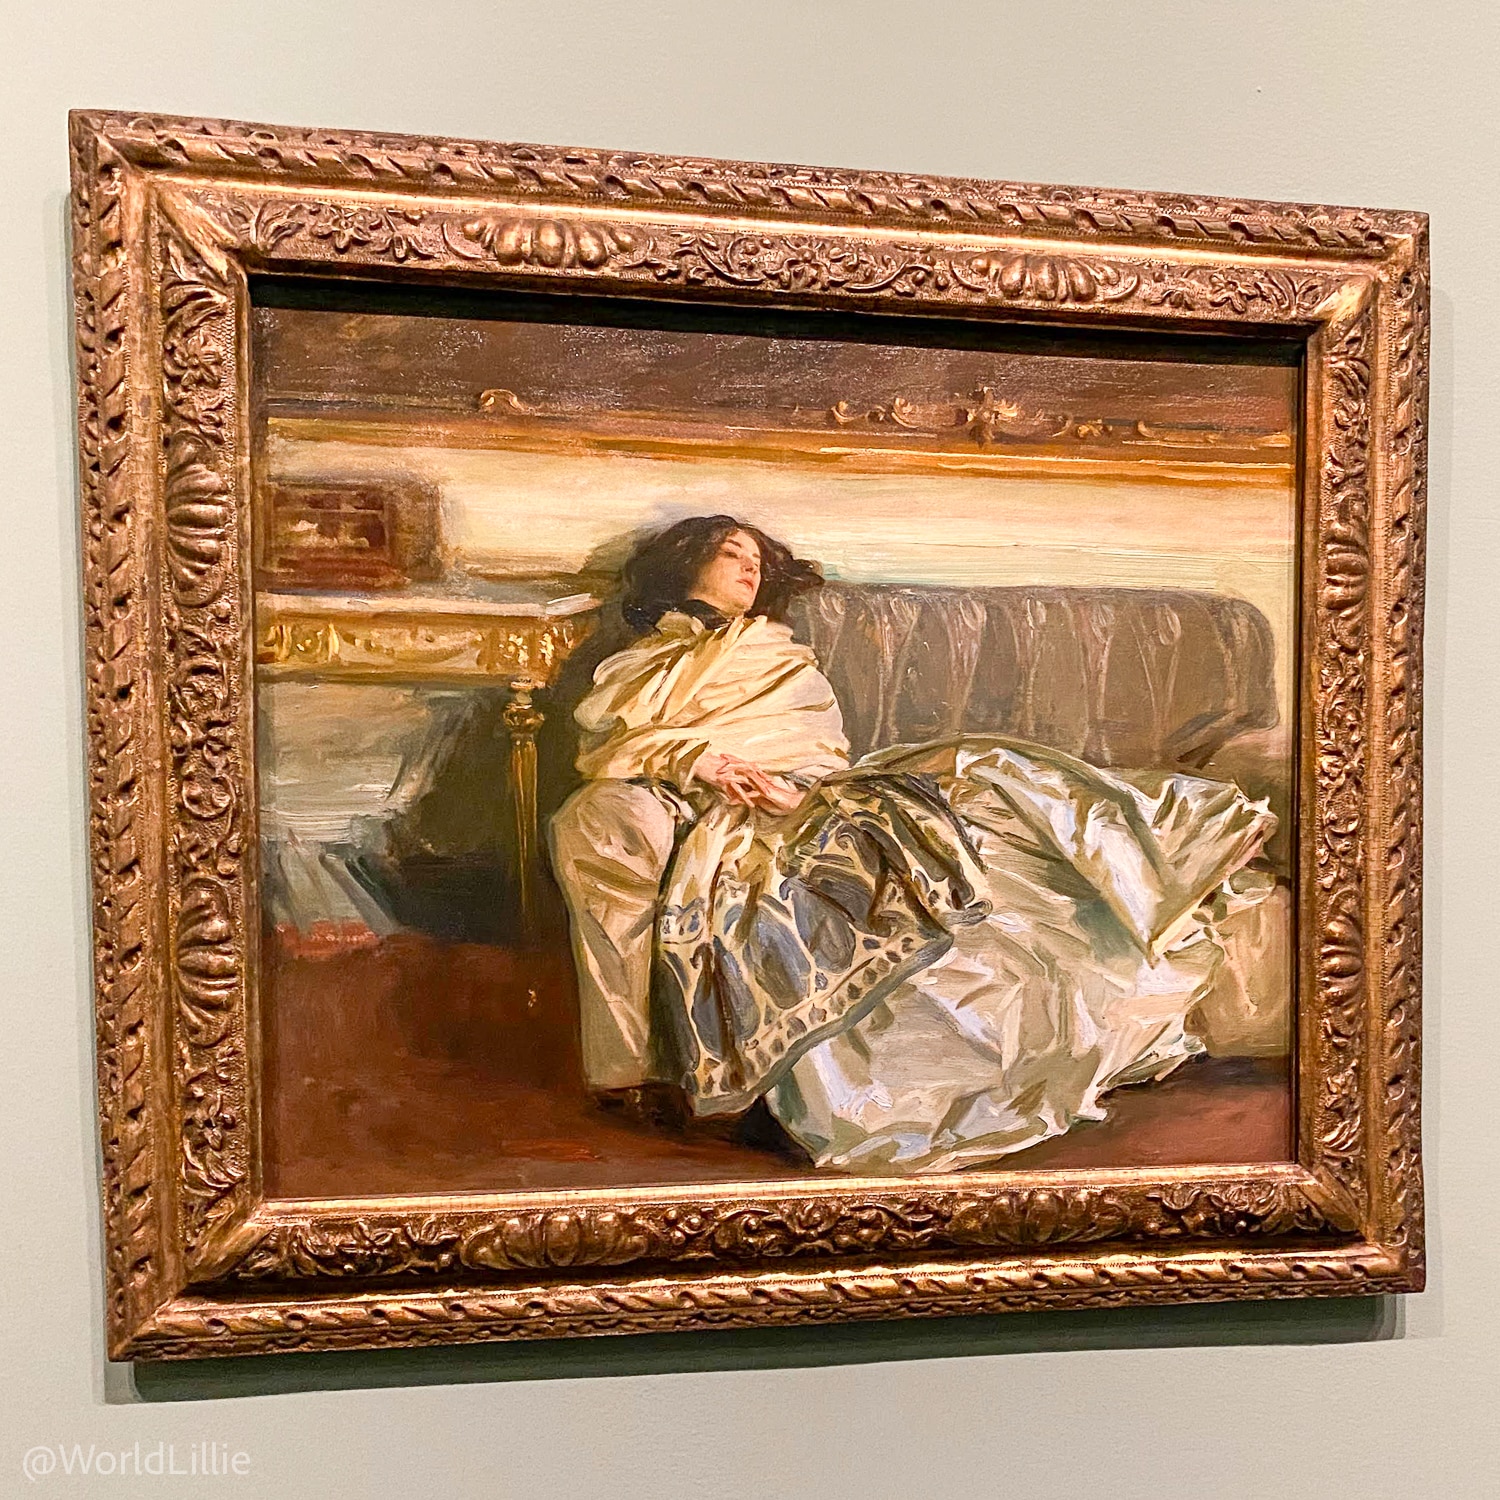 "Nonchaloir (Repose)," 1911 by Sargent.